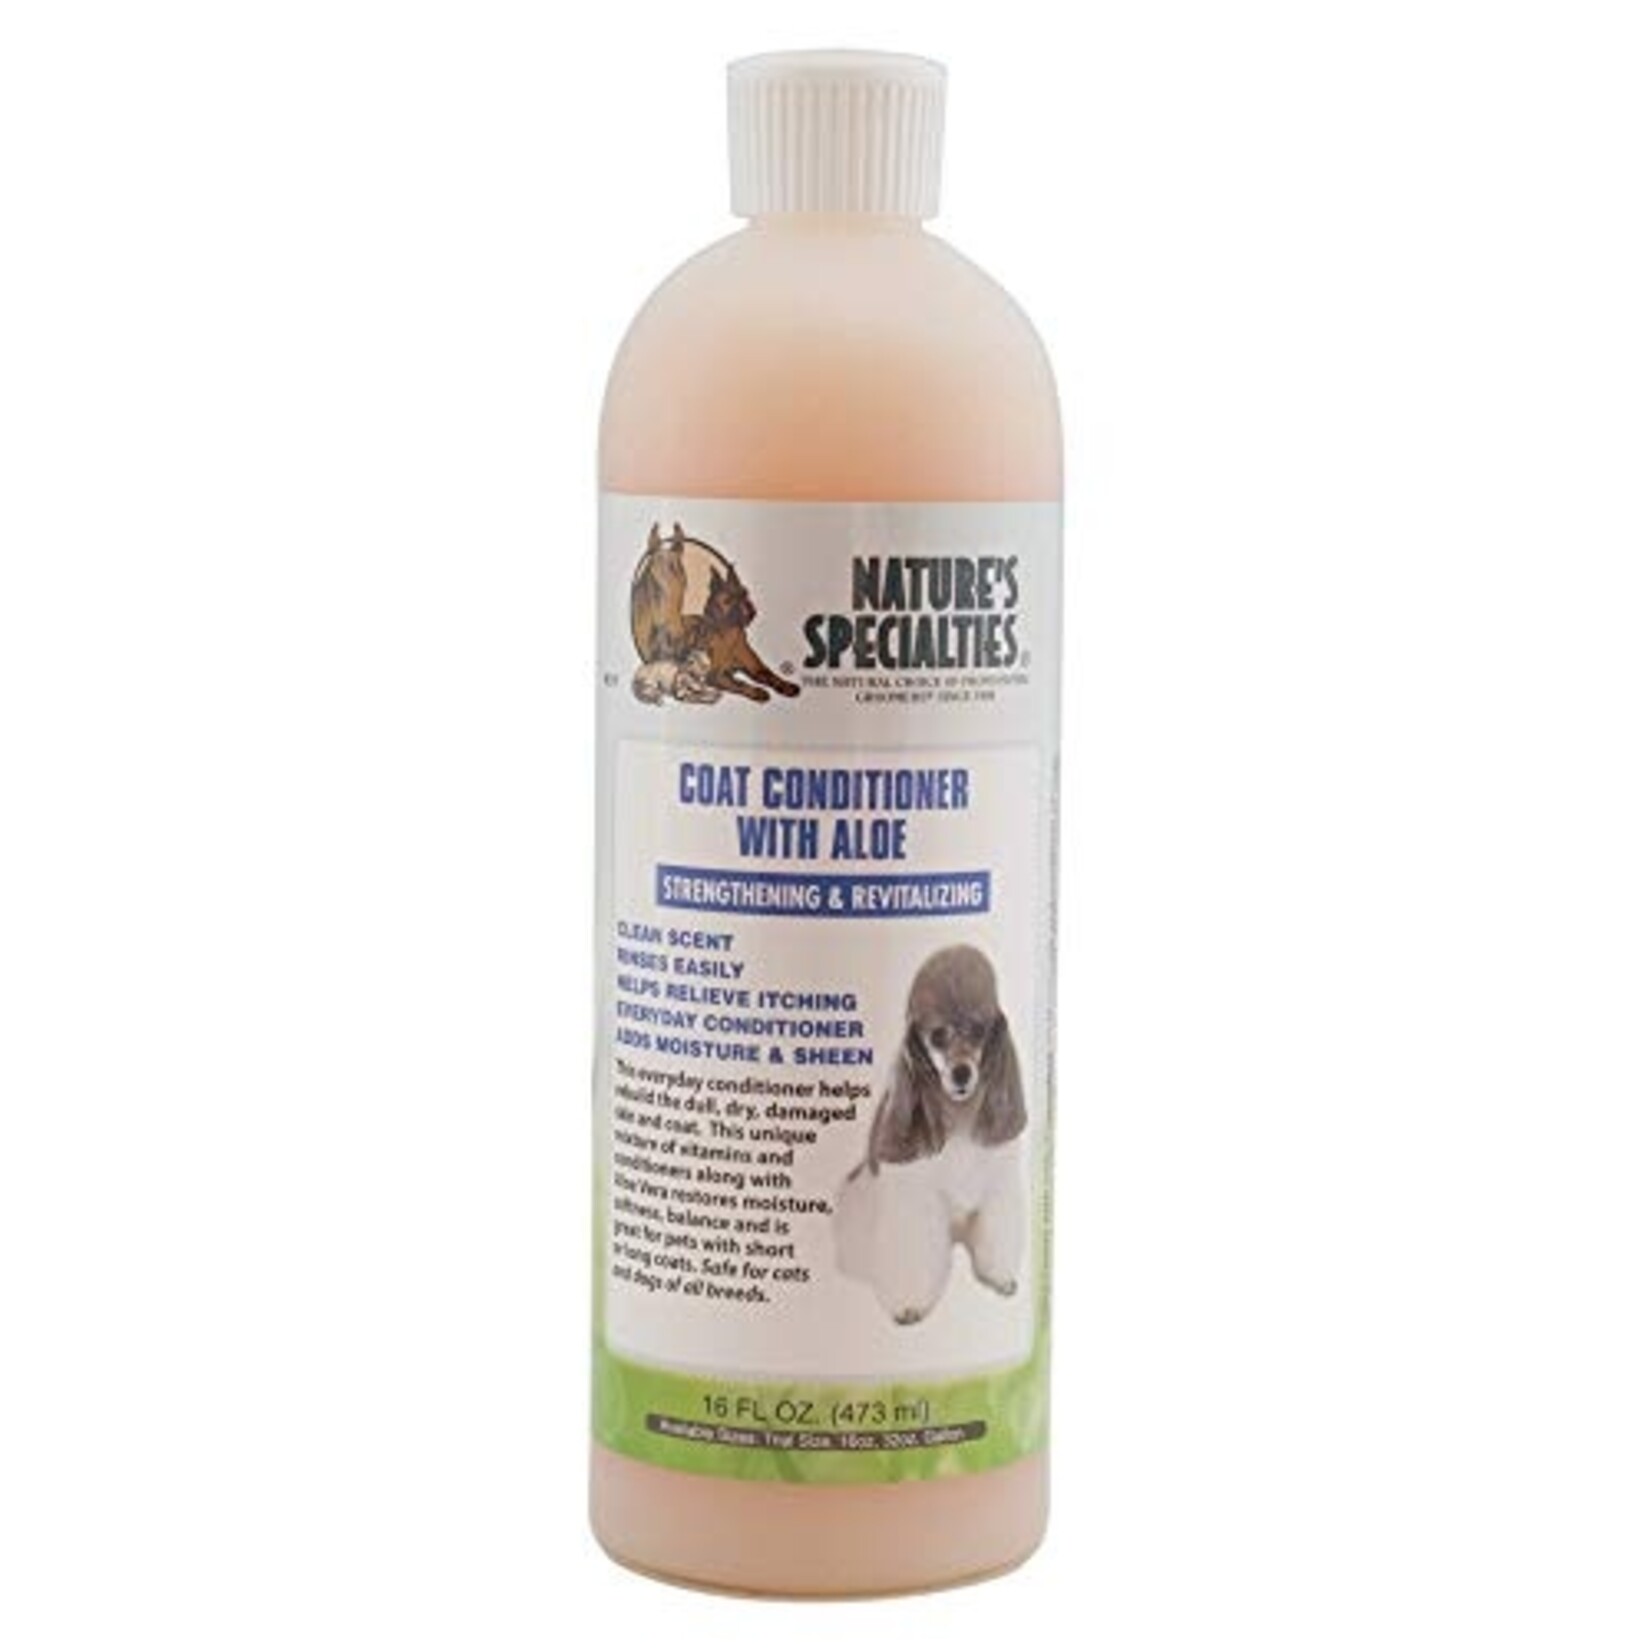 NATURE'S SPECIALTIES COAT CONDITIONER FOR DOGS & CATS 16OZ